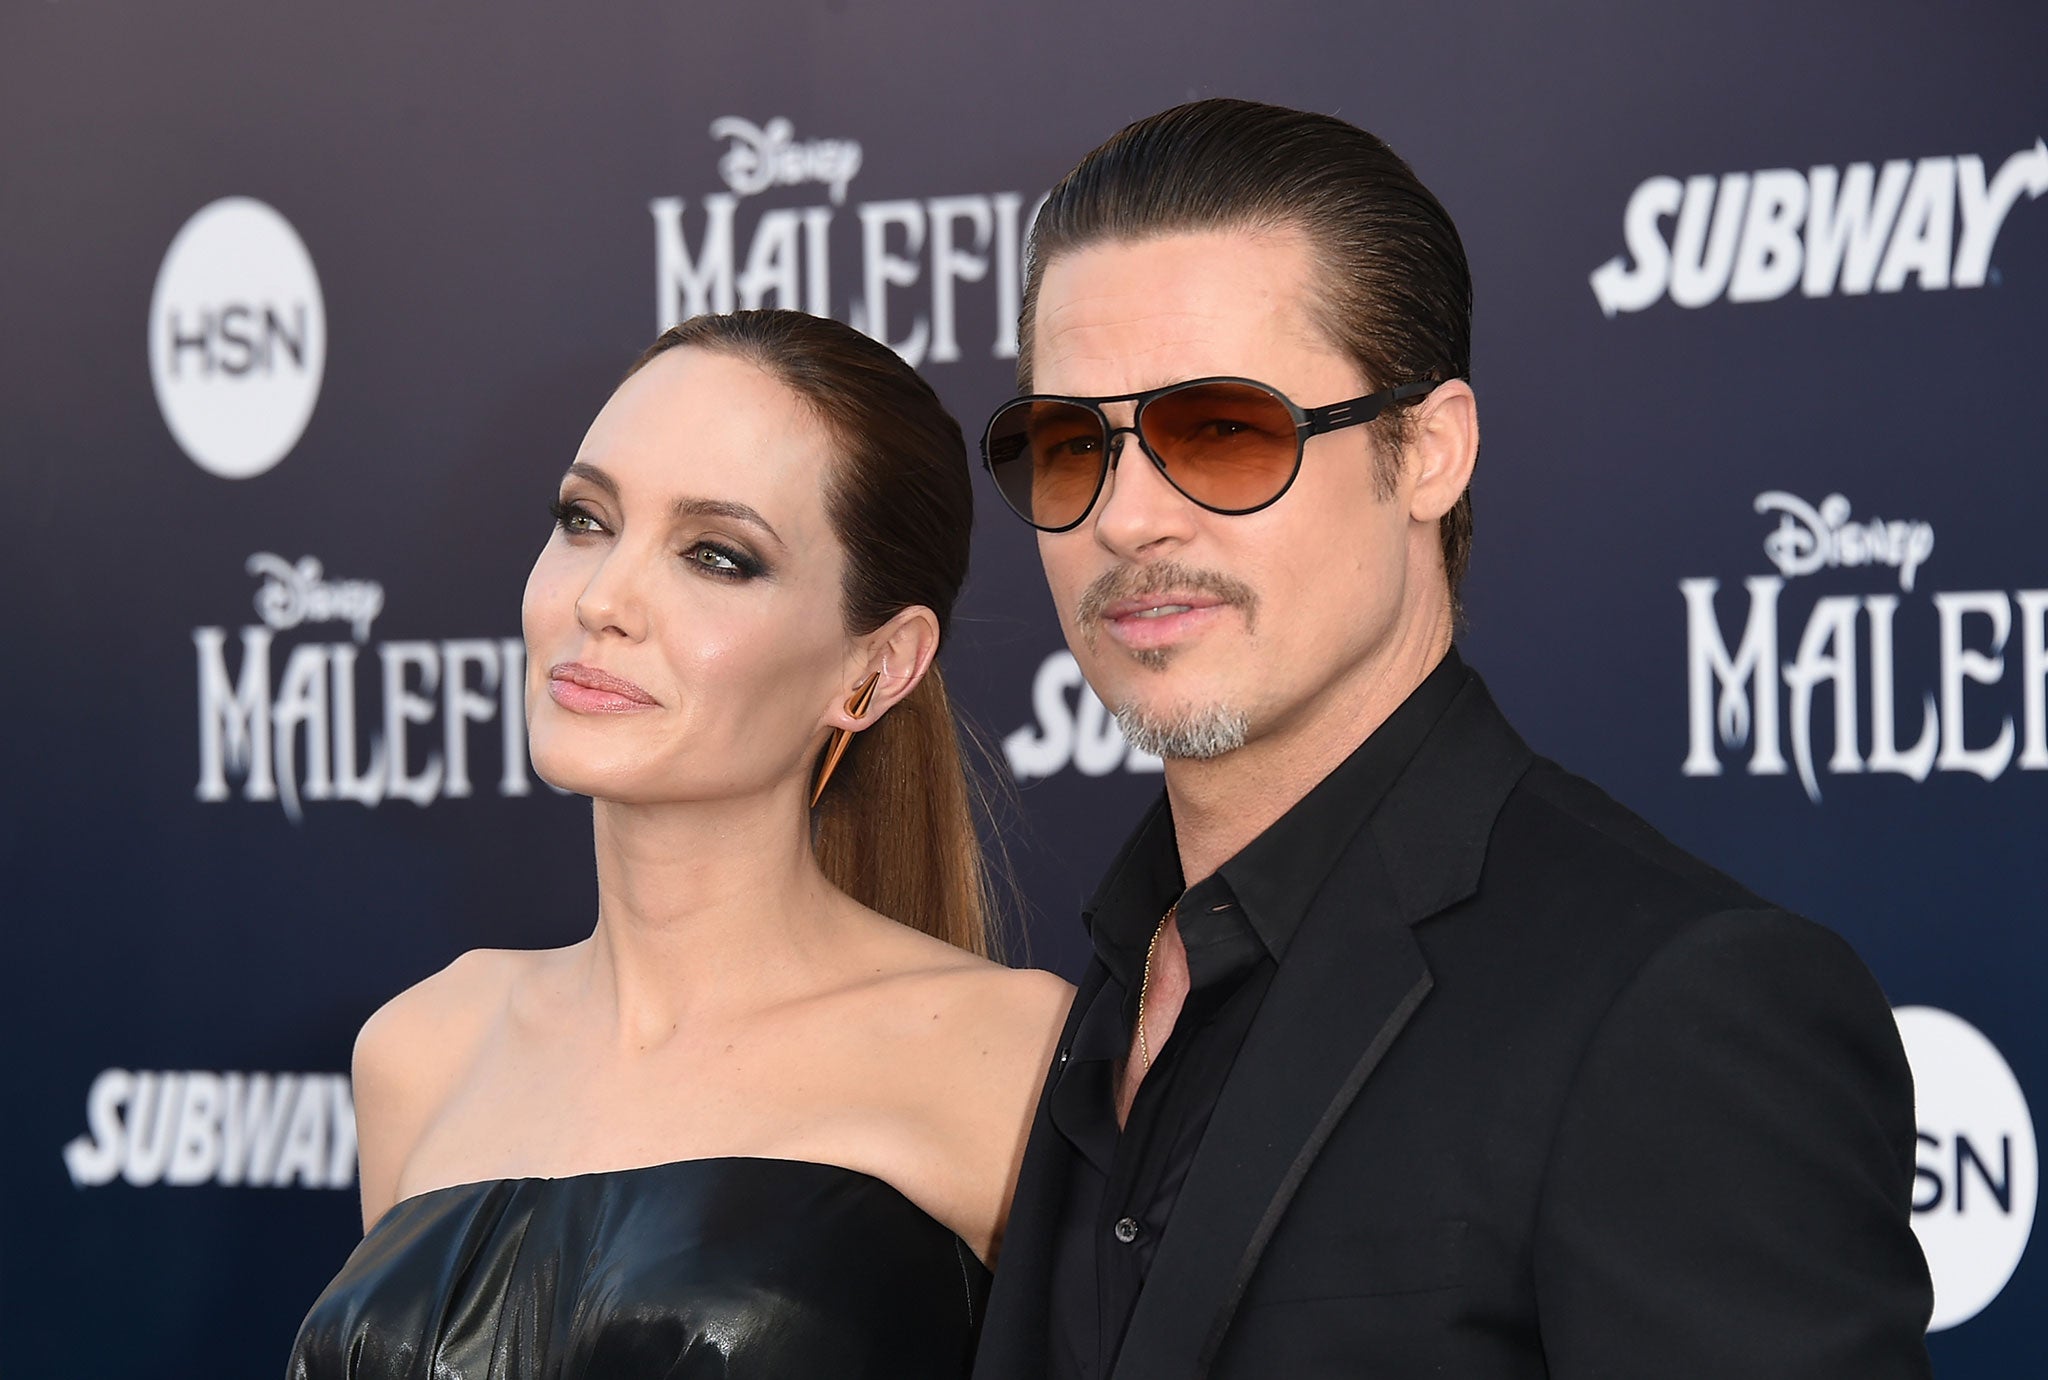 Angelina Jolie and Brad Pitt at the Los Angeles premiere of Maleficent